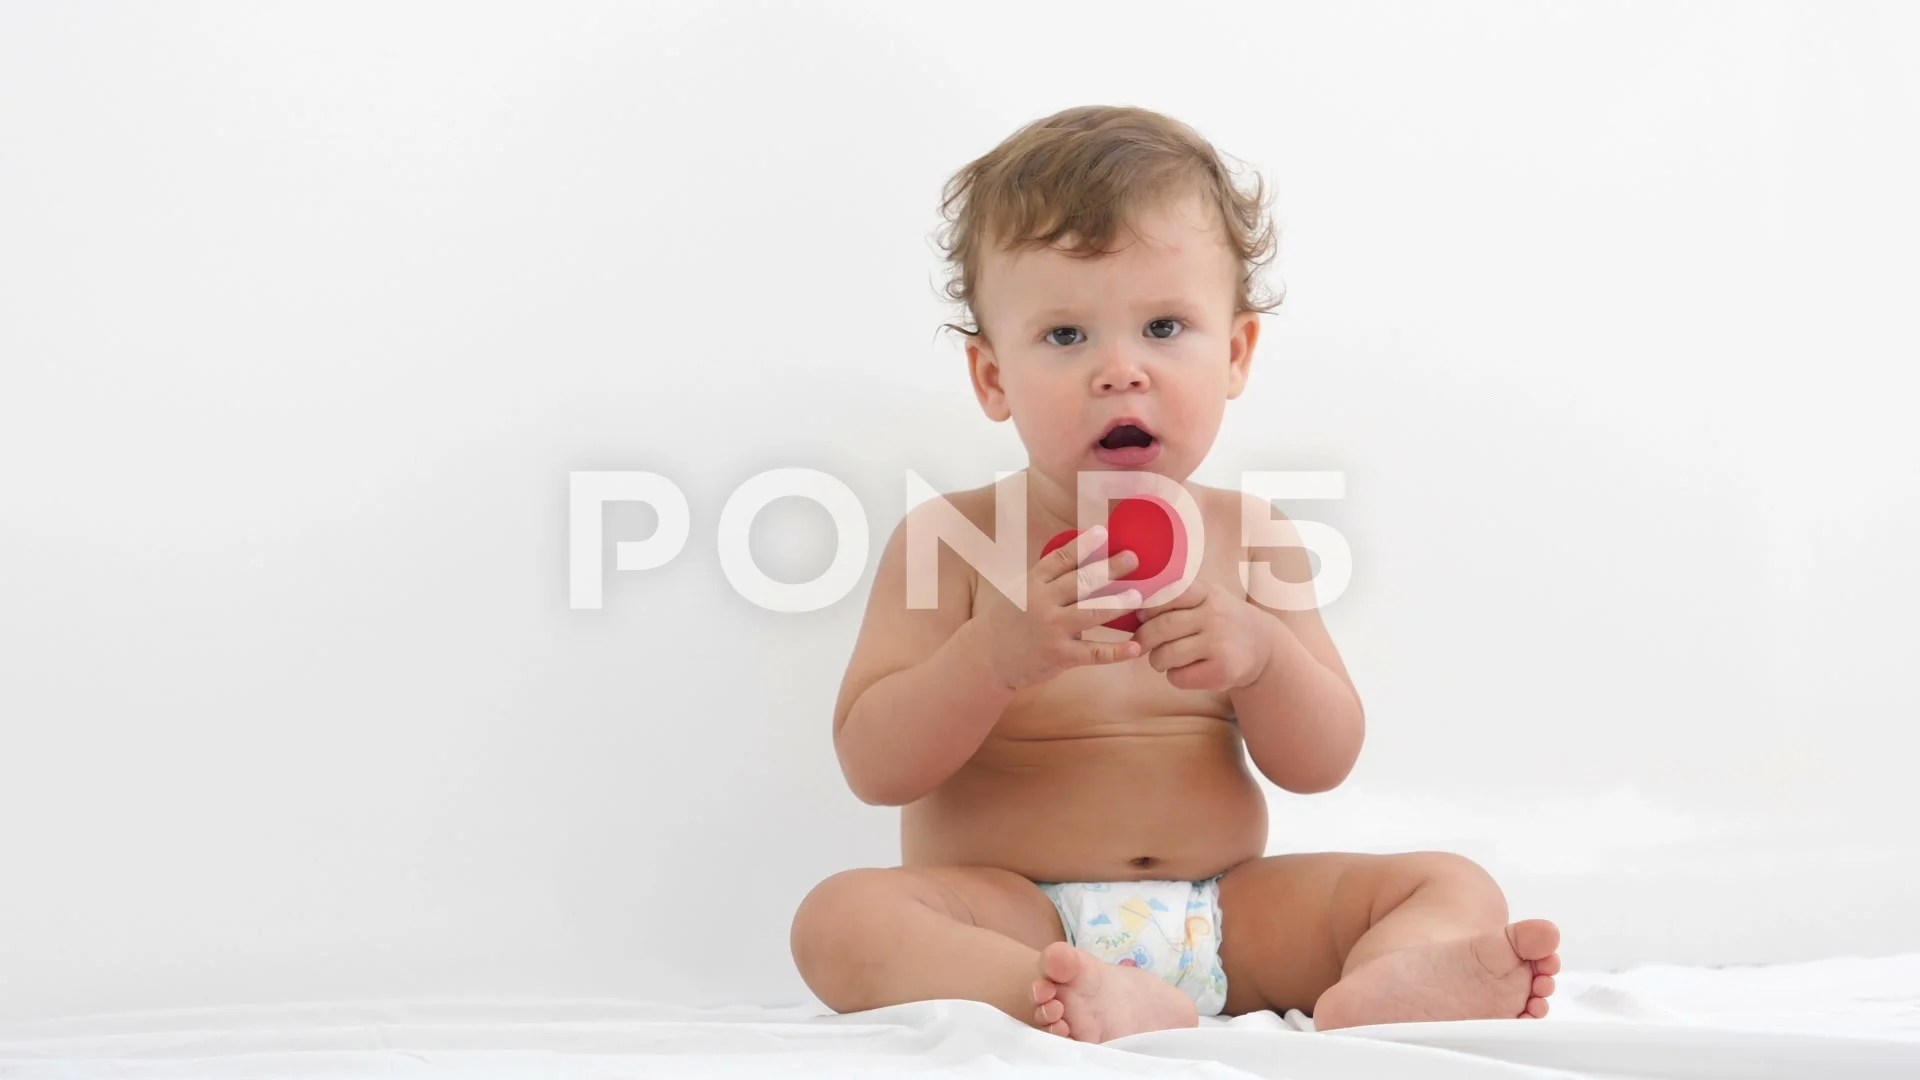 Secrets of Baby Behavior: Babies' Firsts: When babies learn to sit up